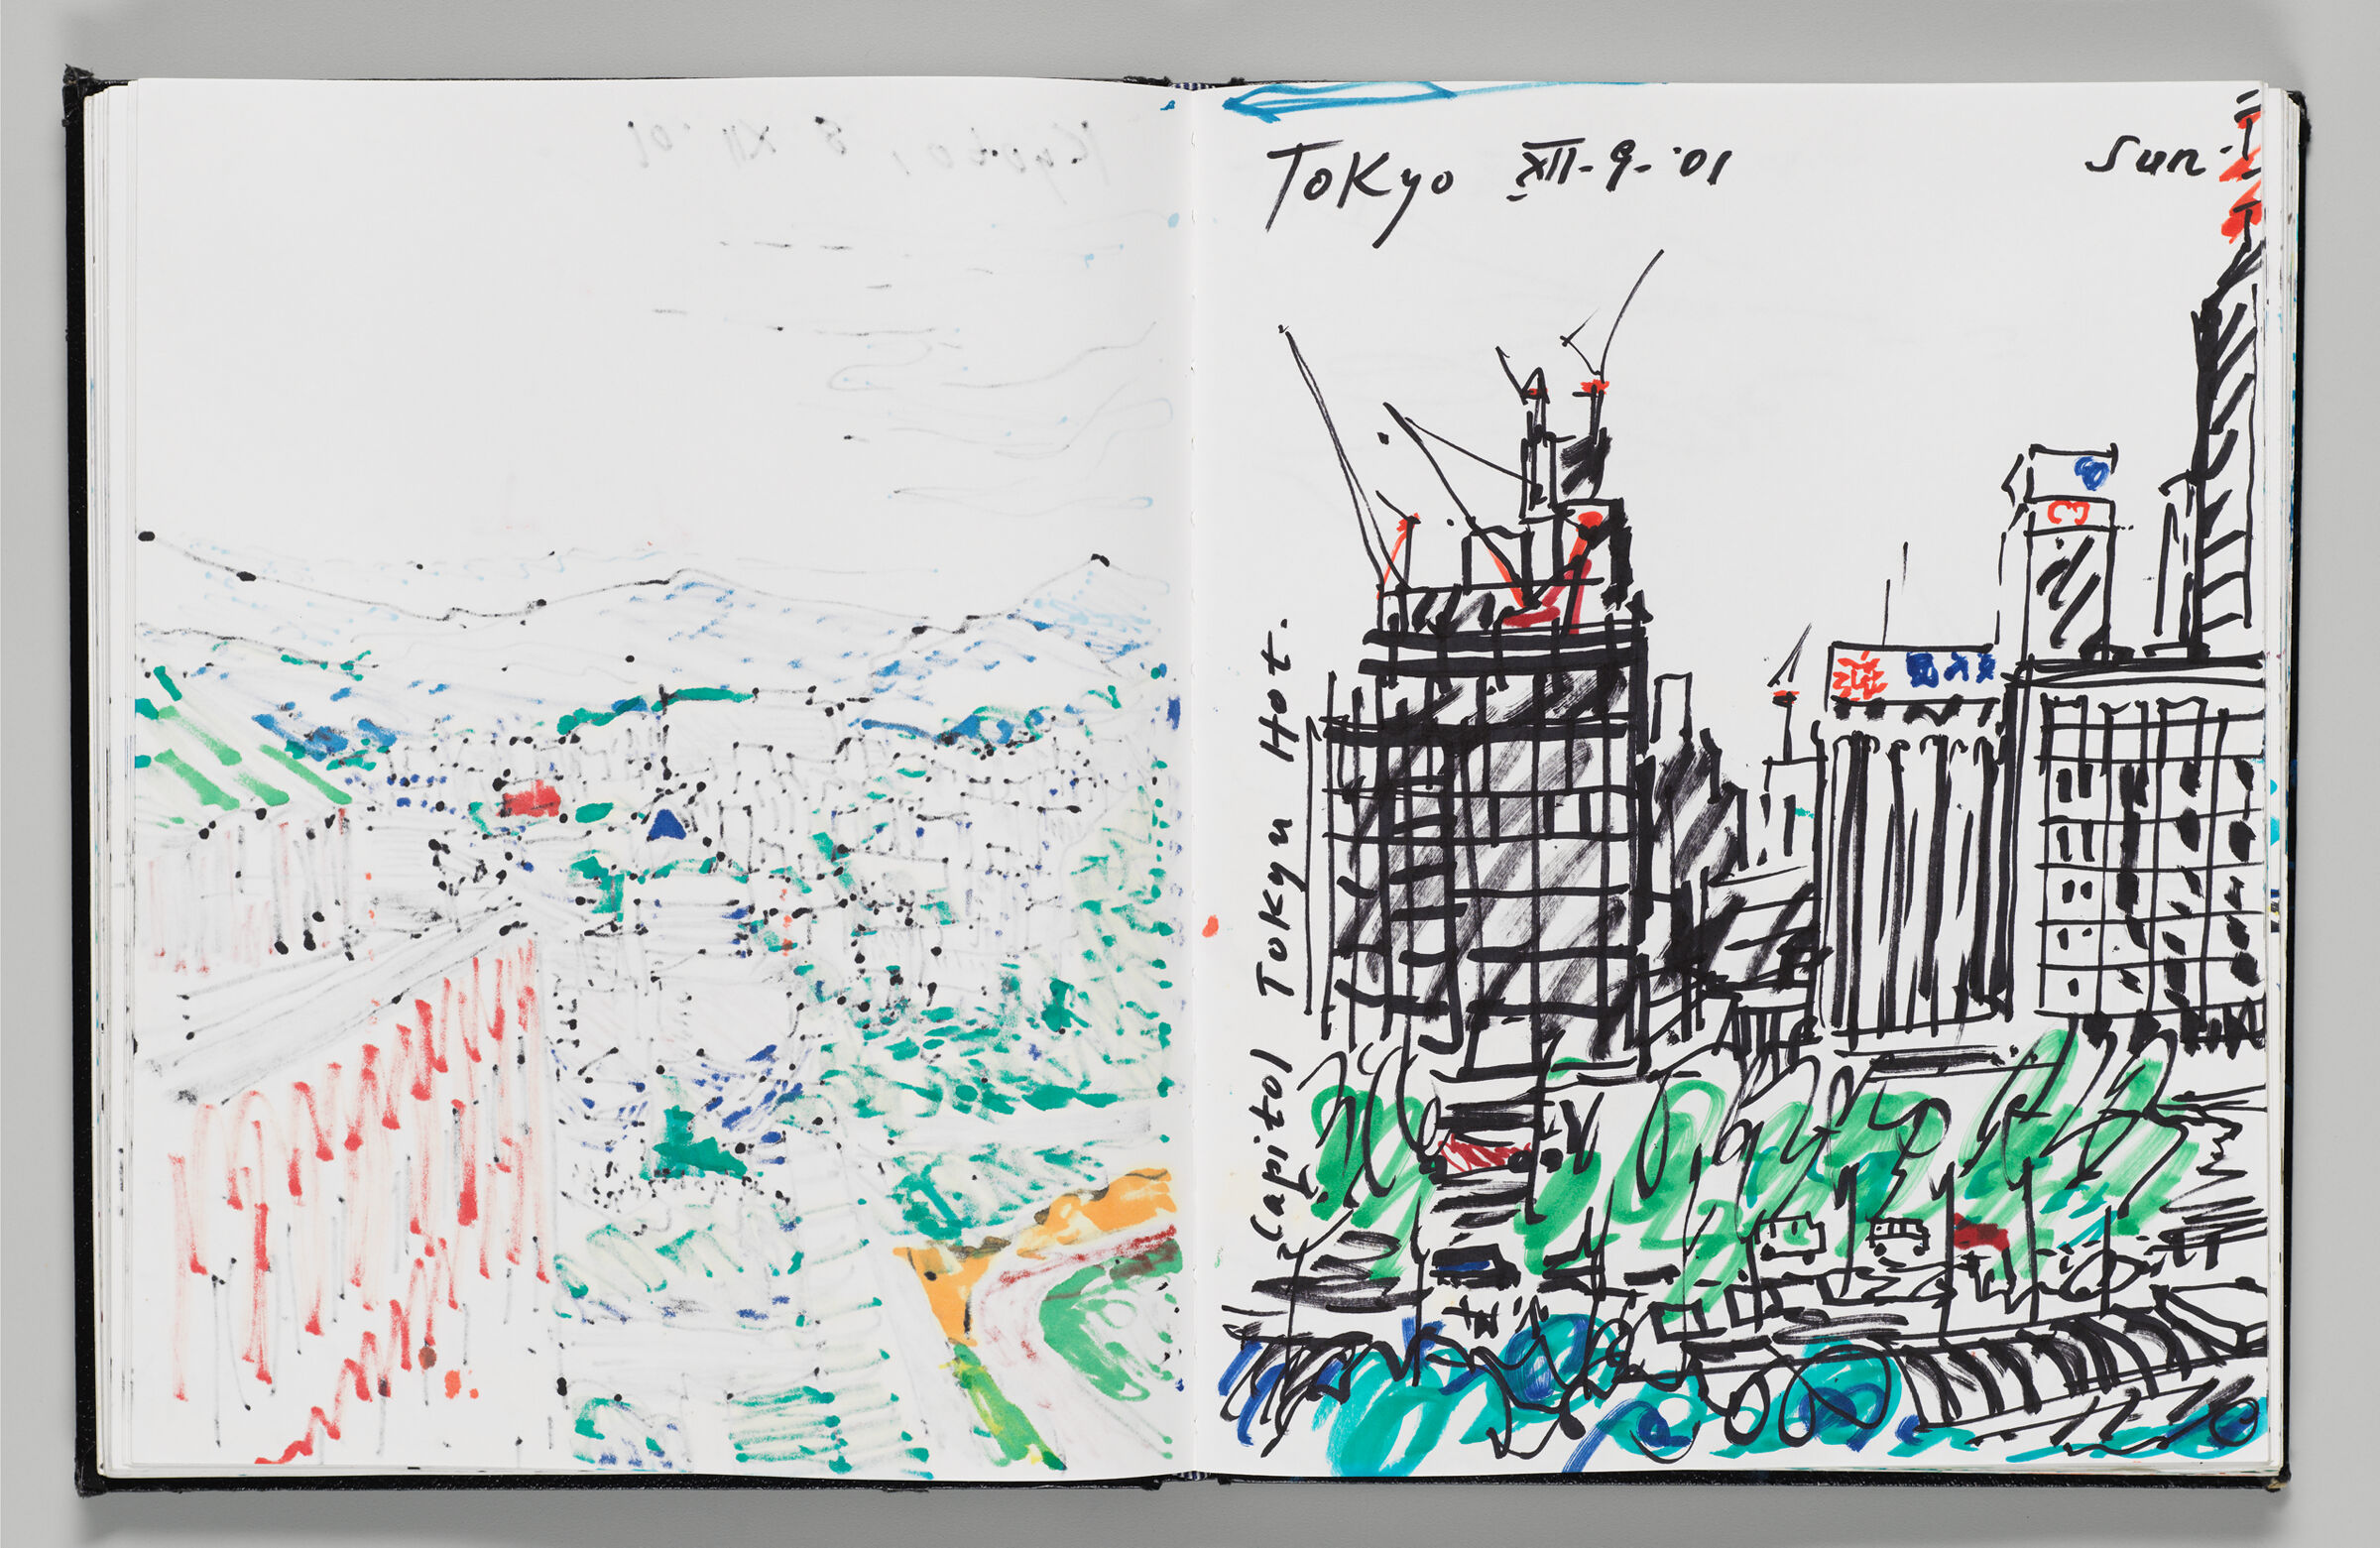 Untitled (Bleed-Through Of Previous Page, Left Page); Untitled (View Of Tokyo, Right Page)